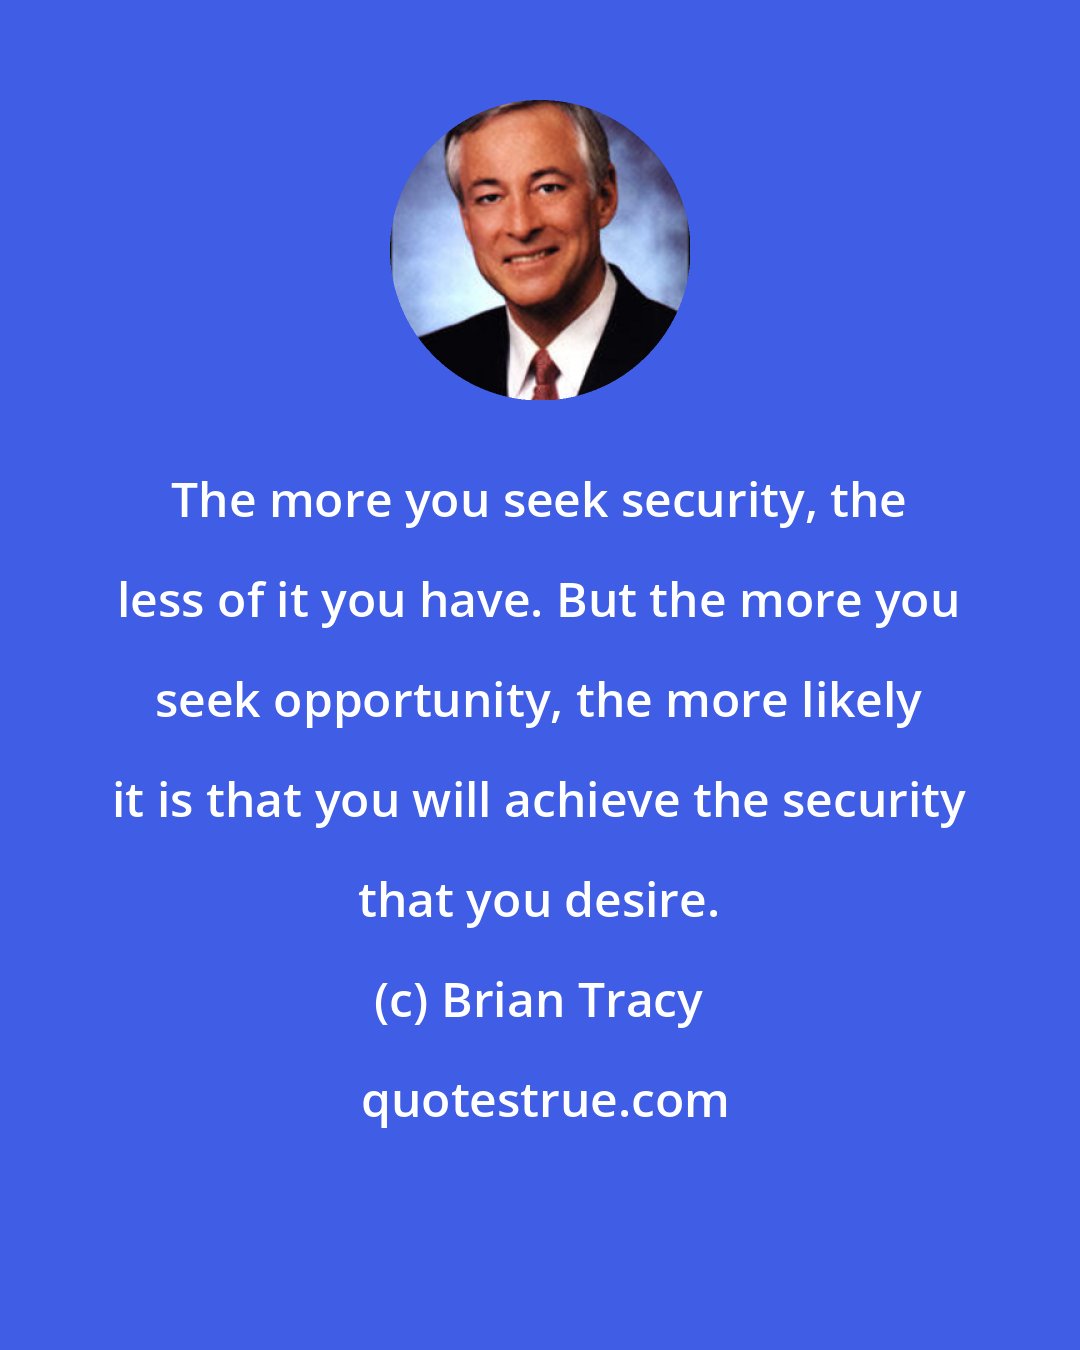 Brian Tracy: The more you seek security, the less of it you have. But the more you seek opportunity, the more likely it is that you will achieve the security that you desire.